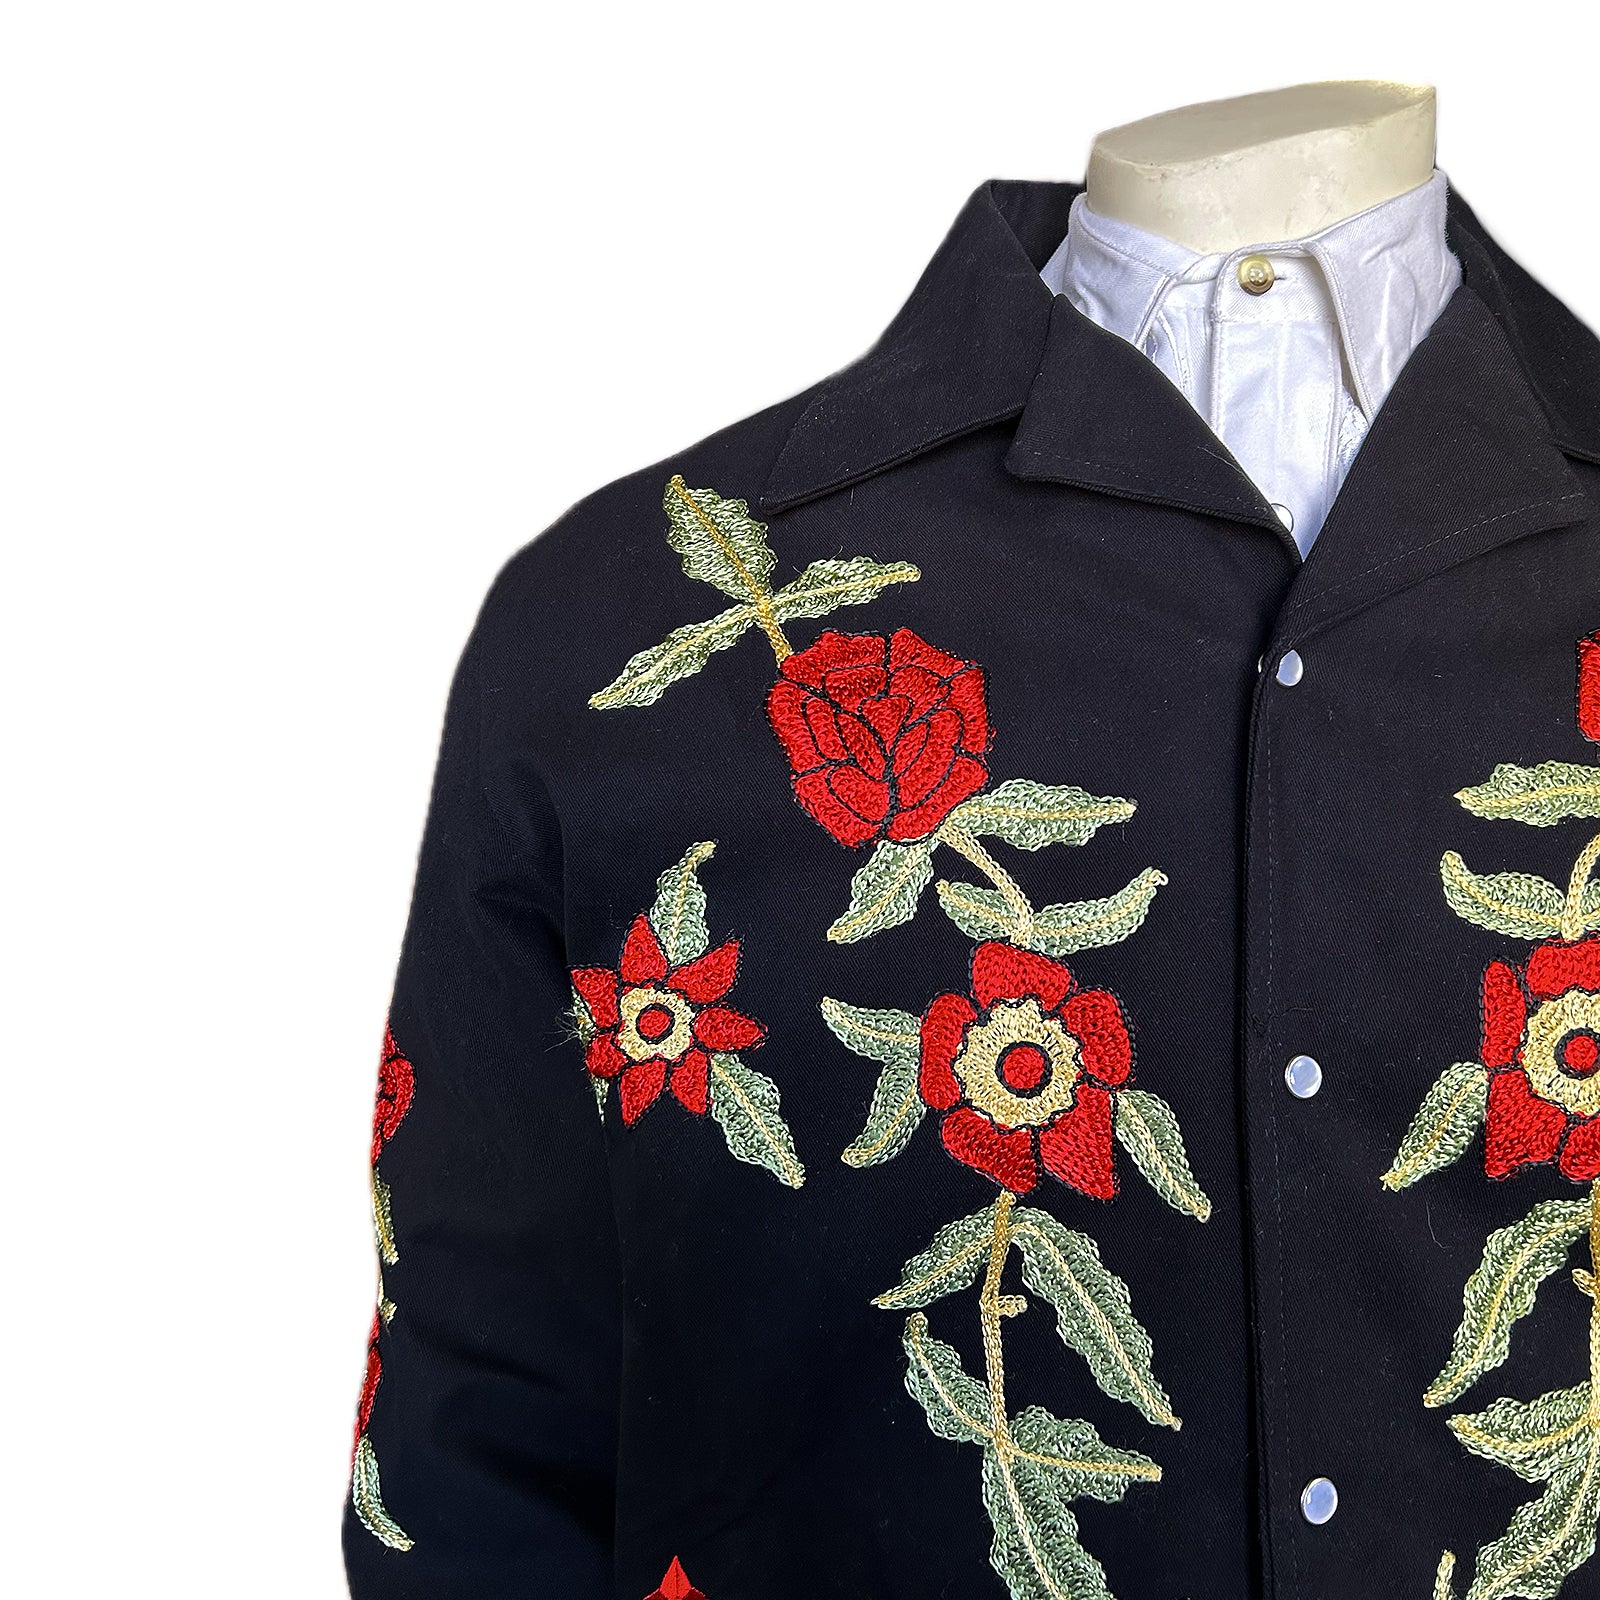 Men's Vintage Western Bolero Jacket with Red Floral Embroidery